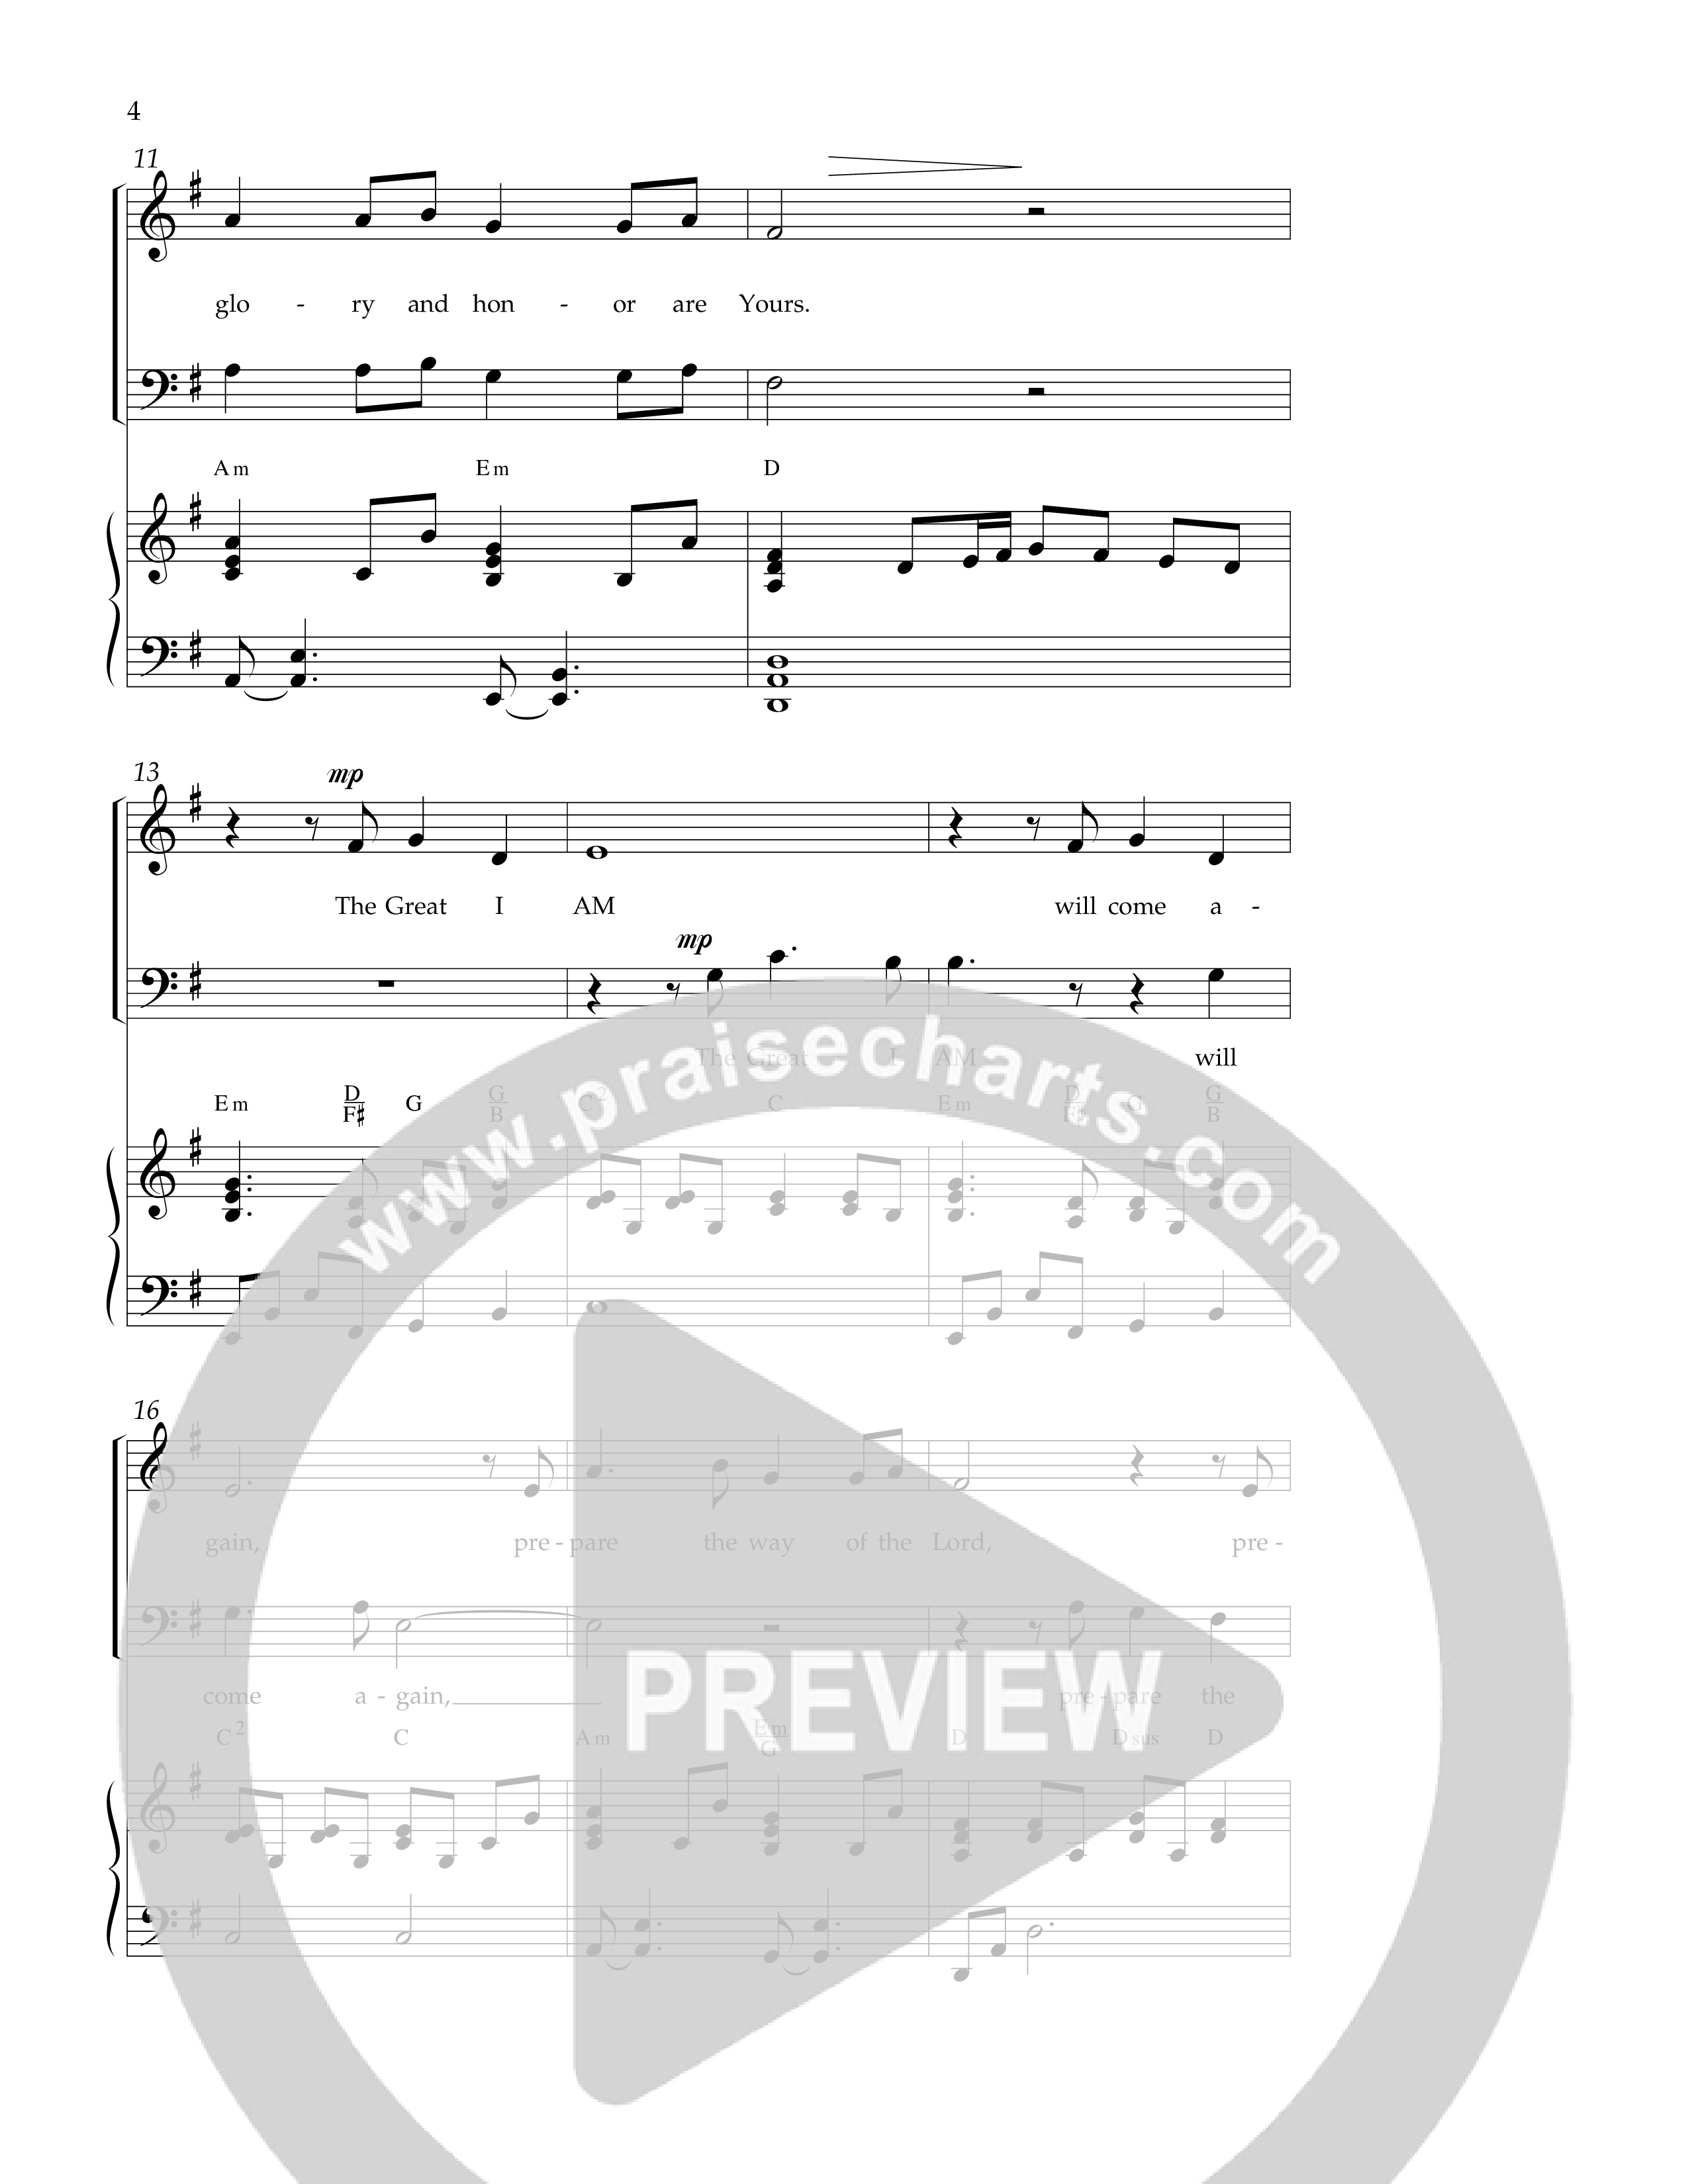 Hymn To His Coming (Choral Anthem SATB) Anthem (SATB/Piano) (Lifeway Choral / Arr. Russell Mauldin)